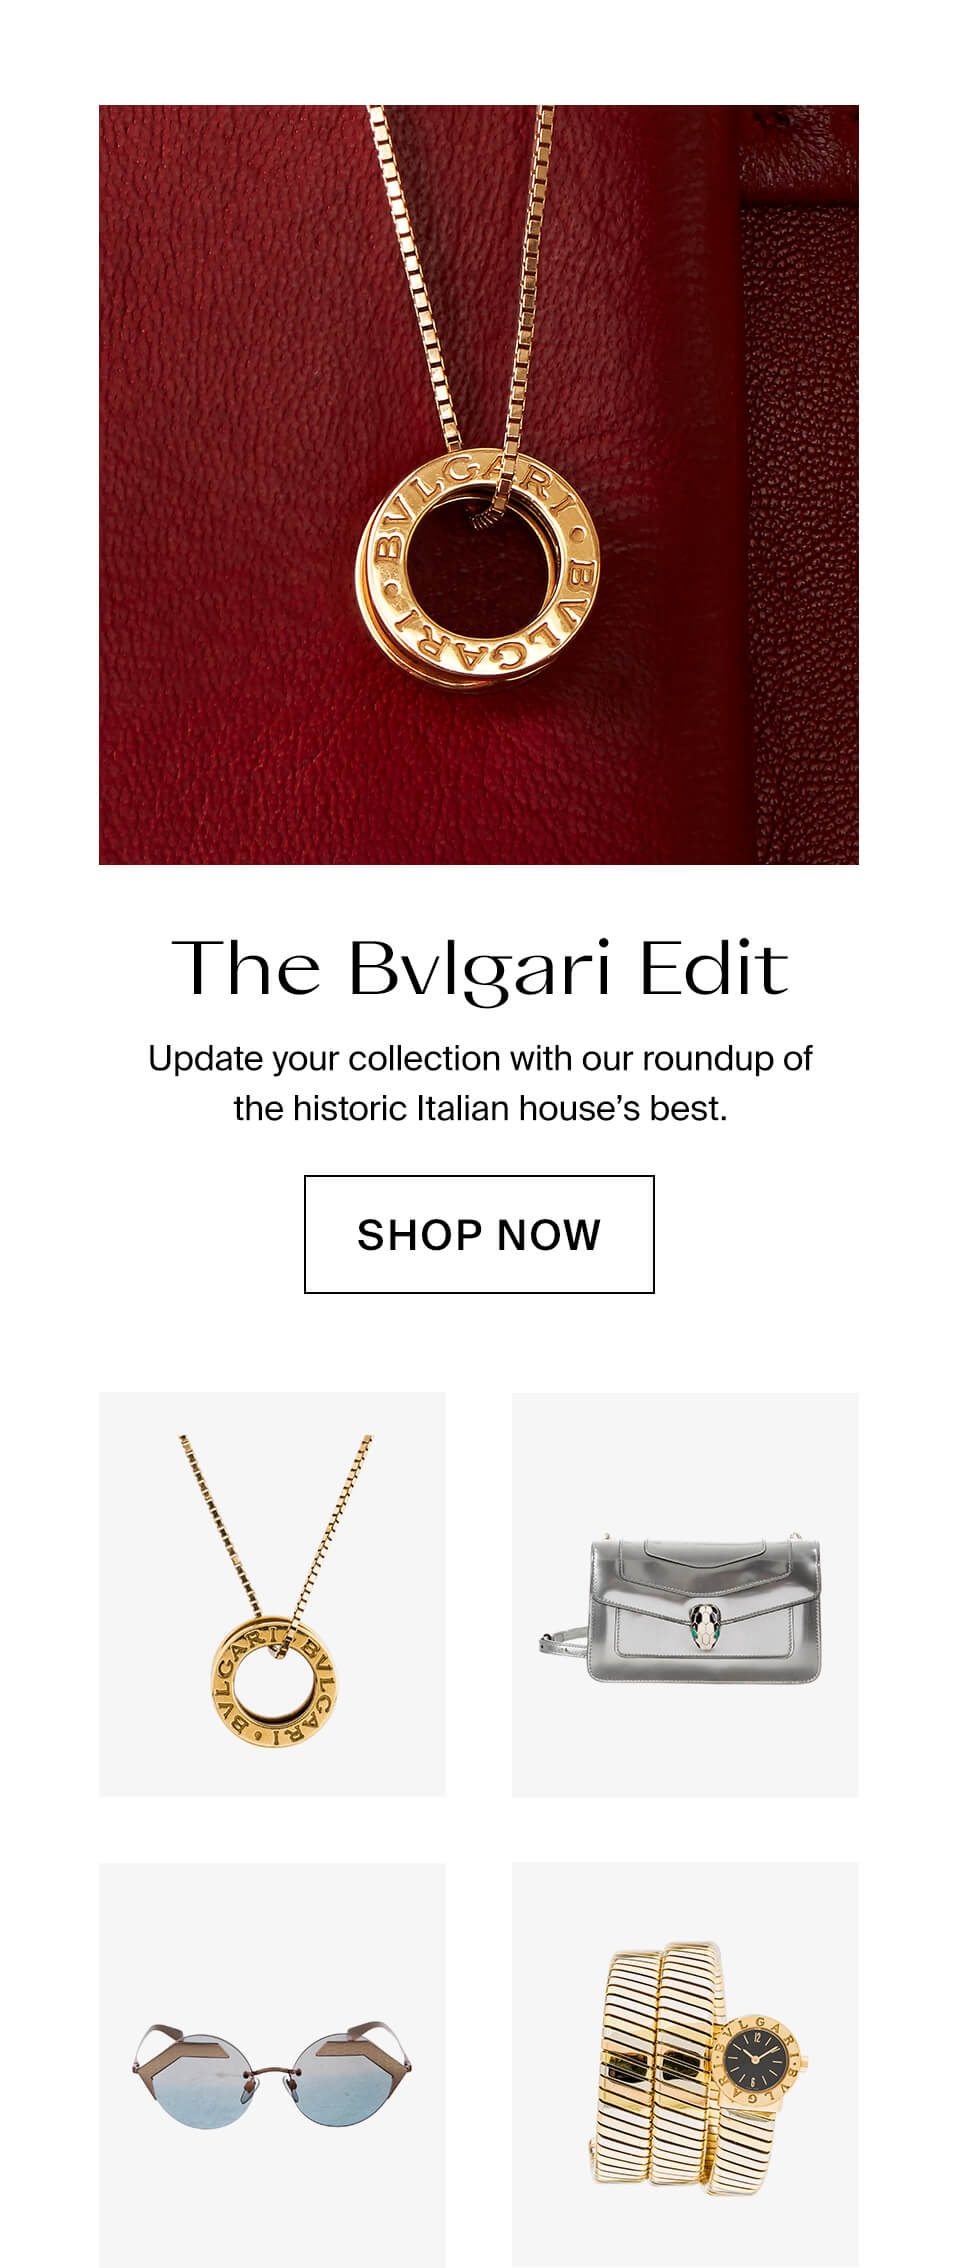 Bring On The Bvlgari - The RealReal Email Archive